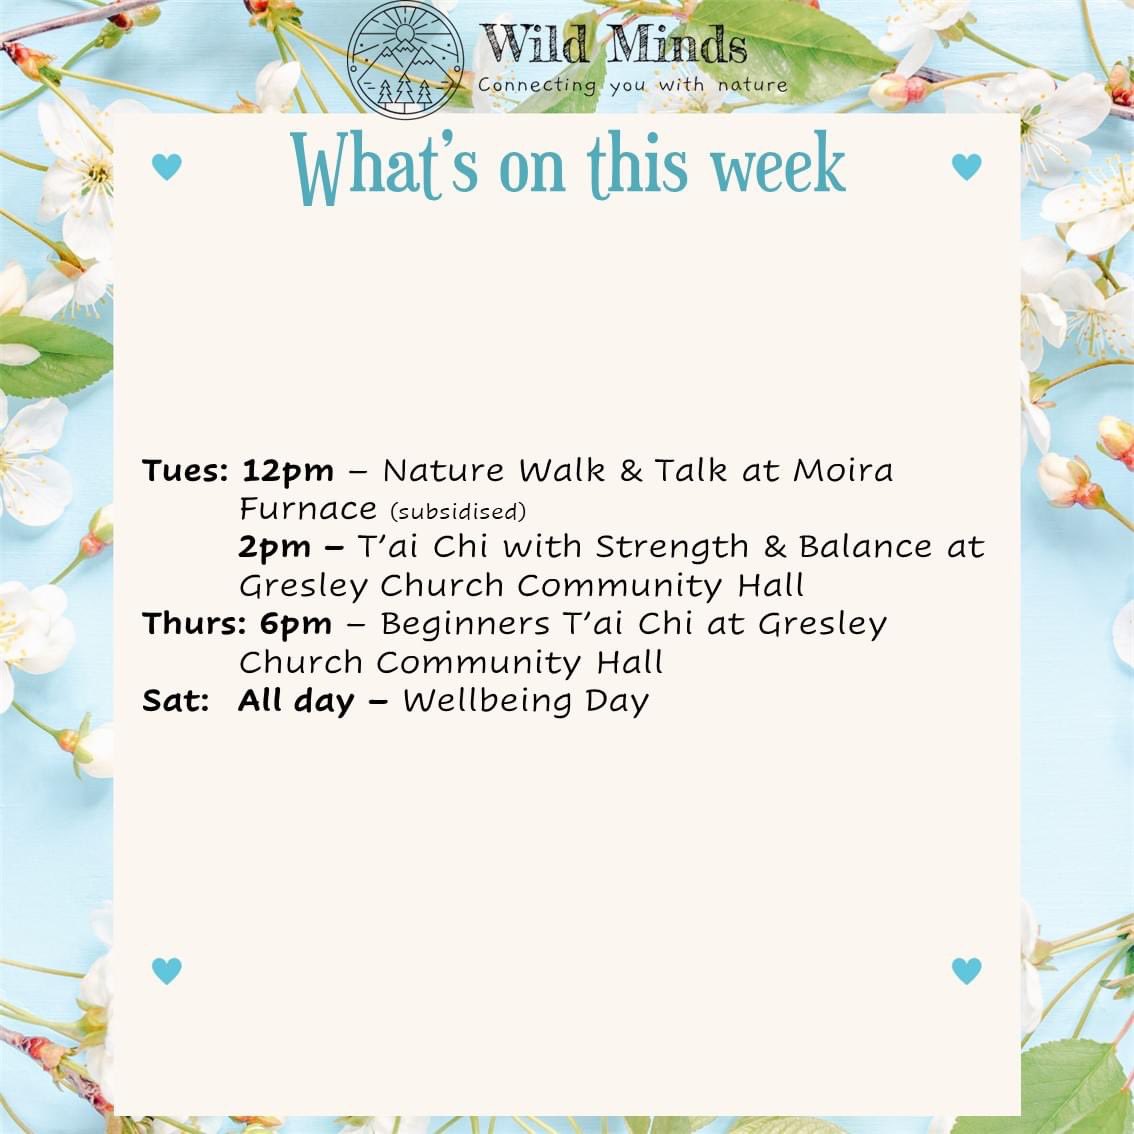 See what’s on this week with our friends at Wild Minds Nature Connection CIC 👇🏼🌳🚶‍♀️☯️ & this Saturday they have their annual Wellbeing Day on 17th June 🤗 check thier fb page or wildmindsnature.co.uk

#wildminds #connection #naturewalk #taichi #wellbeingday2023